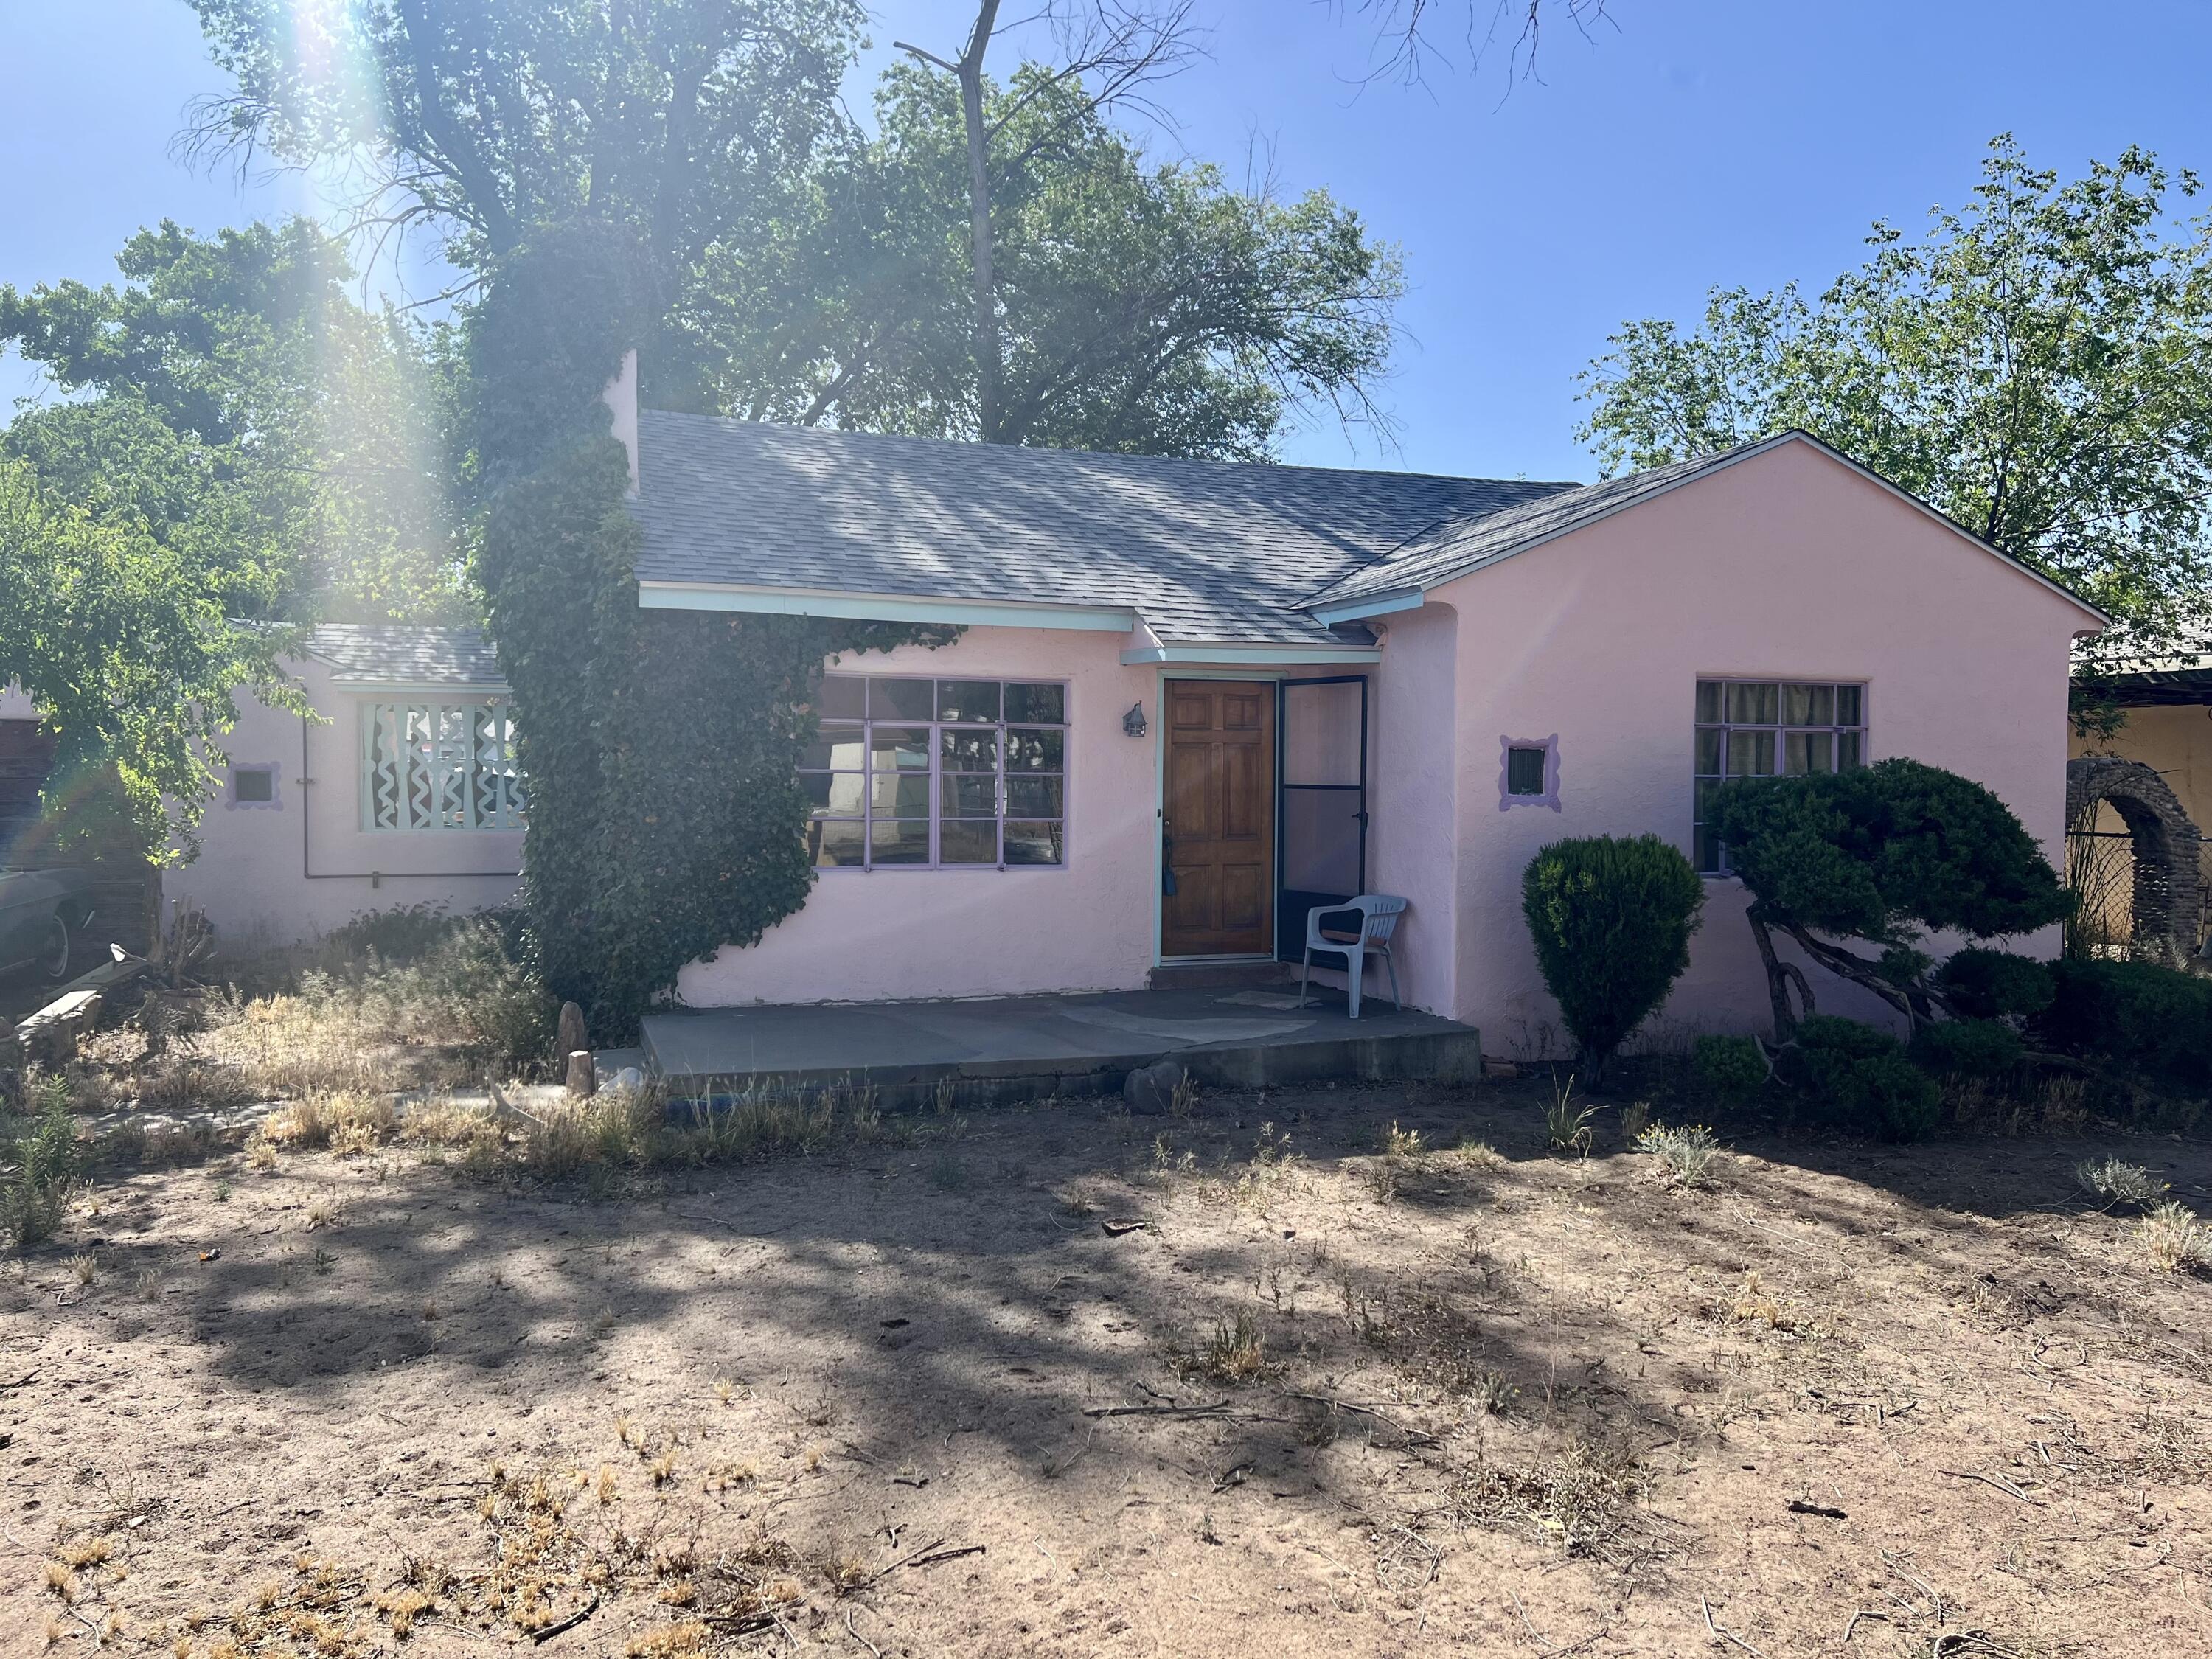 Well maintained classic home in the heart of La Vega Acres. Built in 1940, this 2 bedroom gem has stood the test of time. Great size lot at 1/3 acre with side yard access. New roof 2019. Gas log fireplace and wood burning stove. Original hardwood floors and cove ceilings. Beautiful big cottonwood trees and vines on property. Conveniently located near restaurants, grocery, UNM, hospitals, etc.